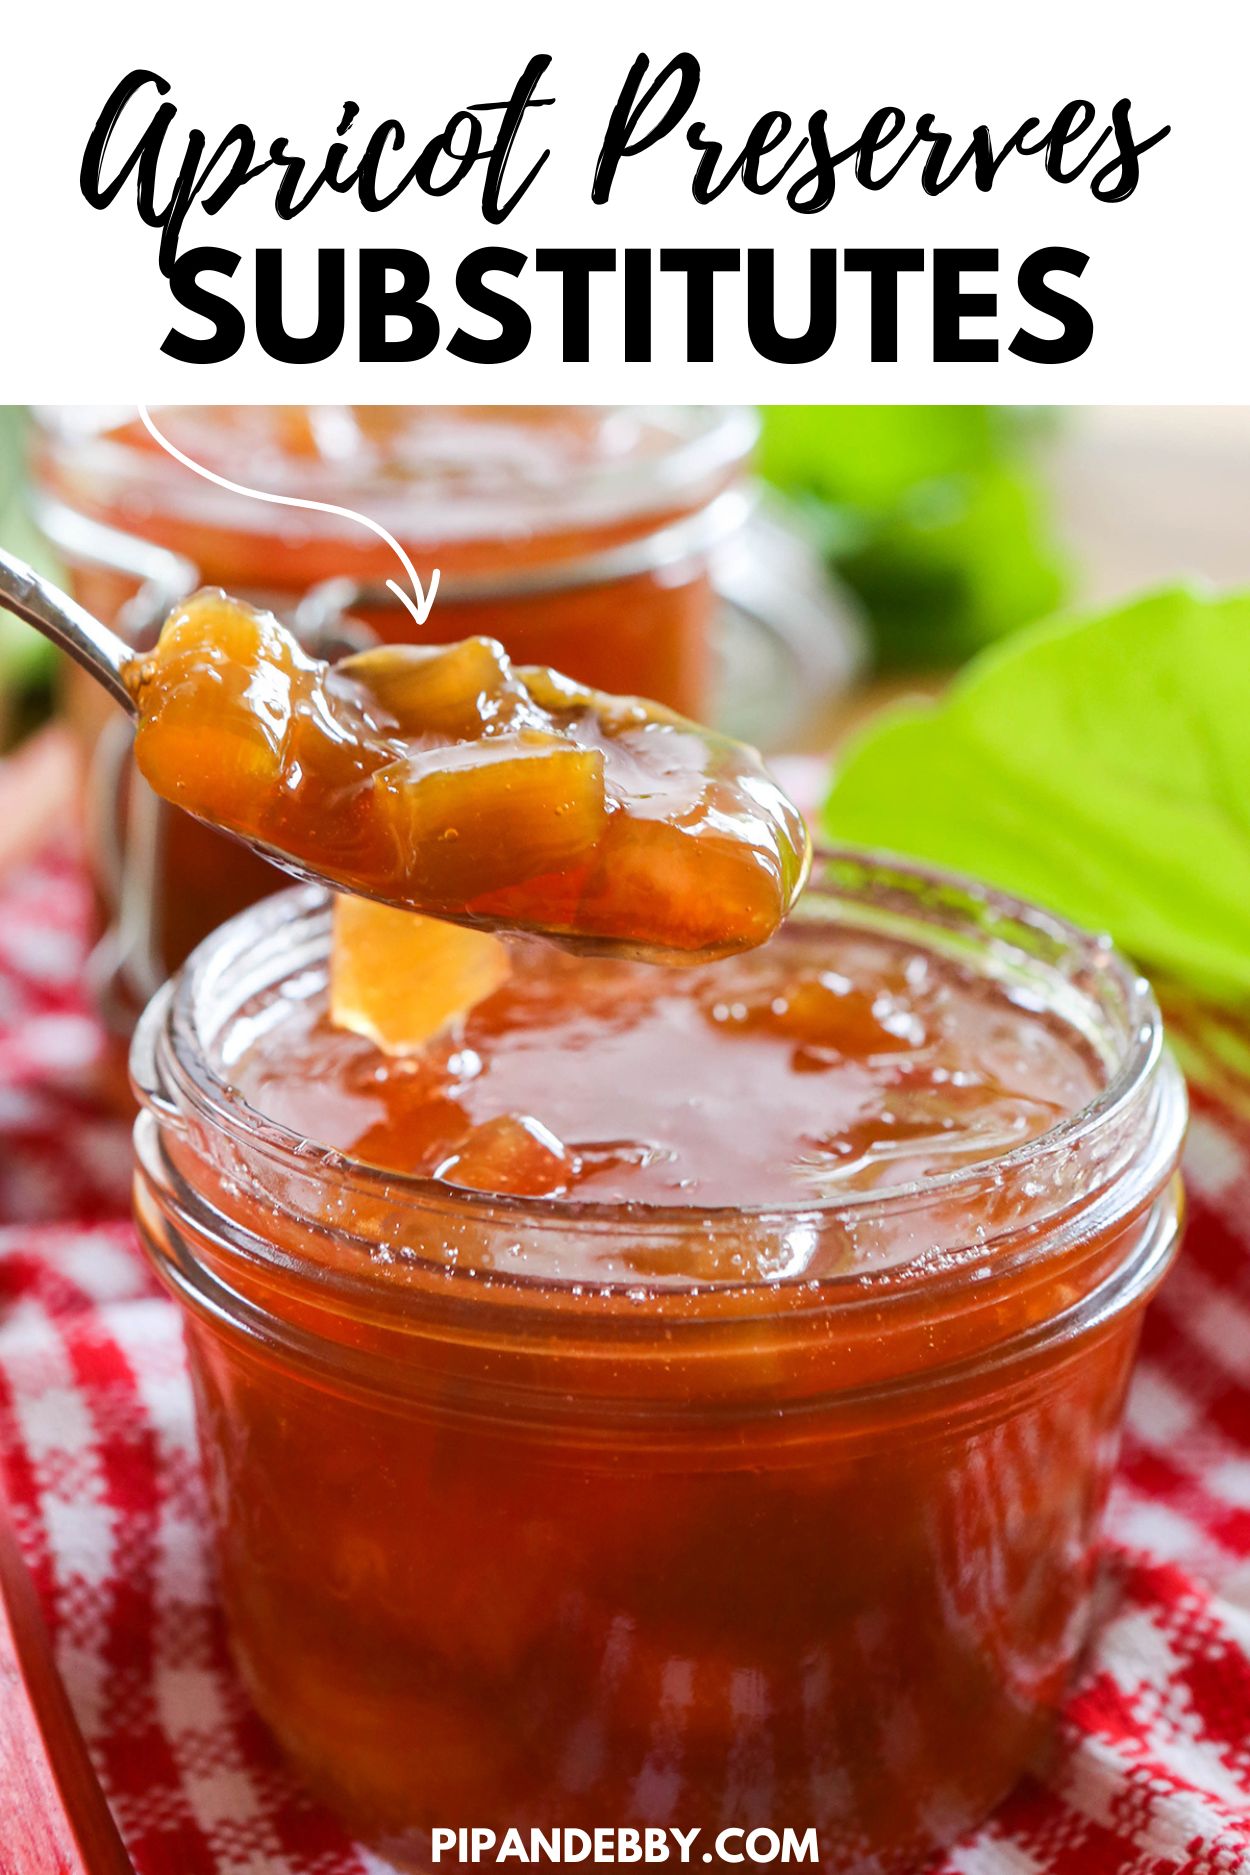 Photo of a jar filled with jam with text overlay reading, "Apricot preserves substitutes."